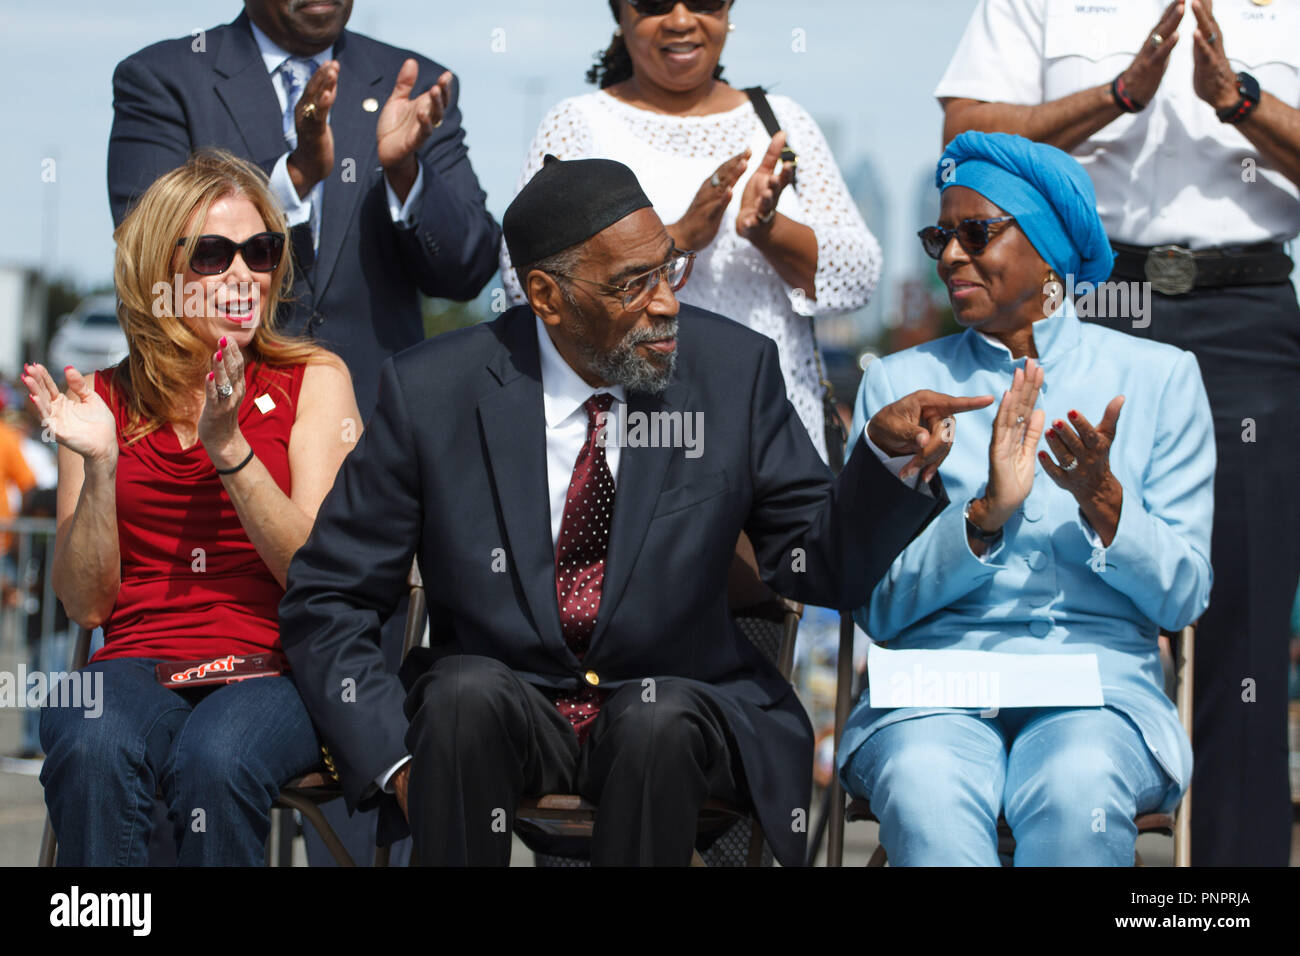 Philadelphia, PA, USA. 22nd Sep, 2018. Award-winning founder of The Sound of Philadelphia Kenny Gamble and wife Faatimah are honored at the Hero Thrill Show, an annual event raising money for children of fallen first responders, September 22, 2018. Credit: Michael Candelori/ZUMA Wire/Alamy Live News Stock Photo